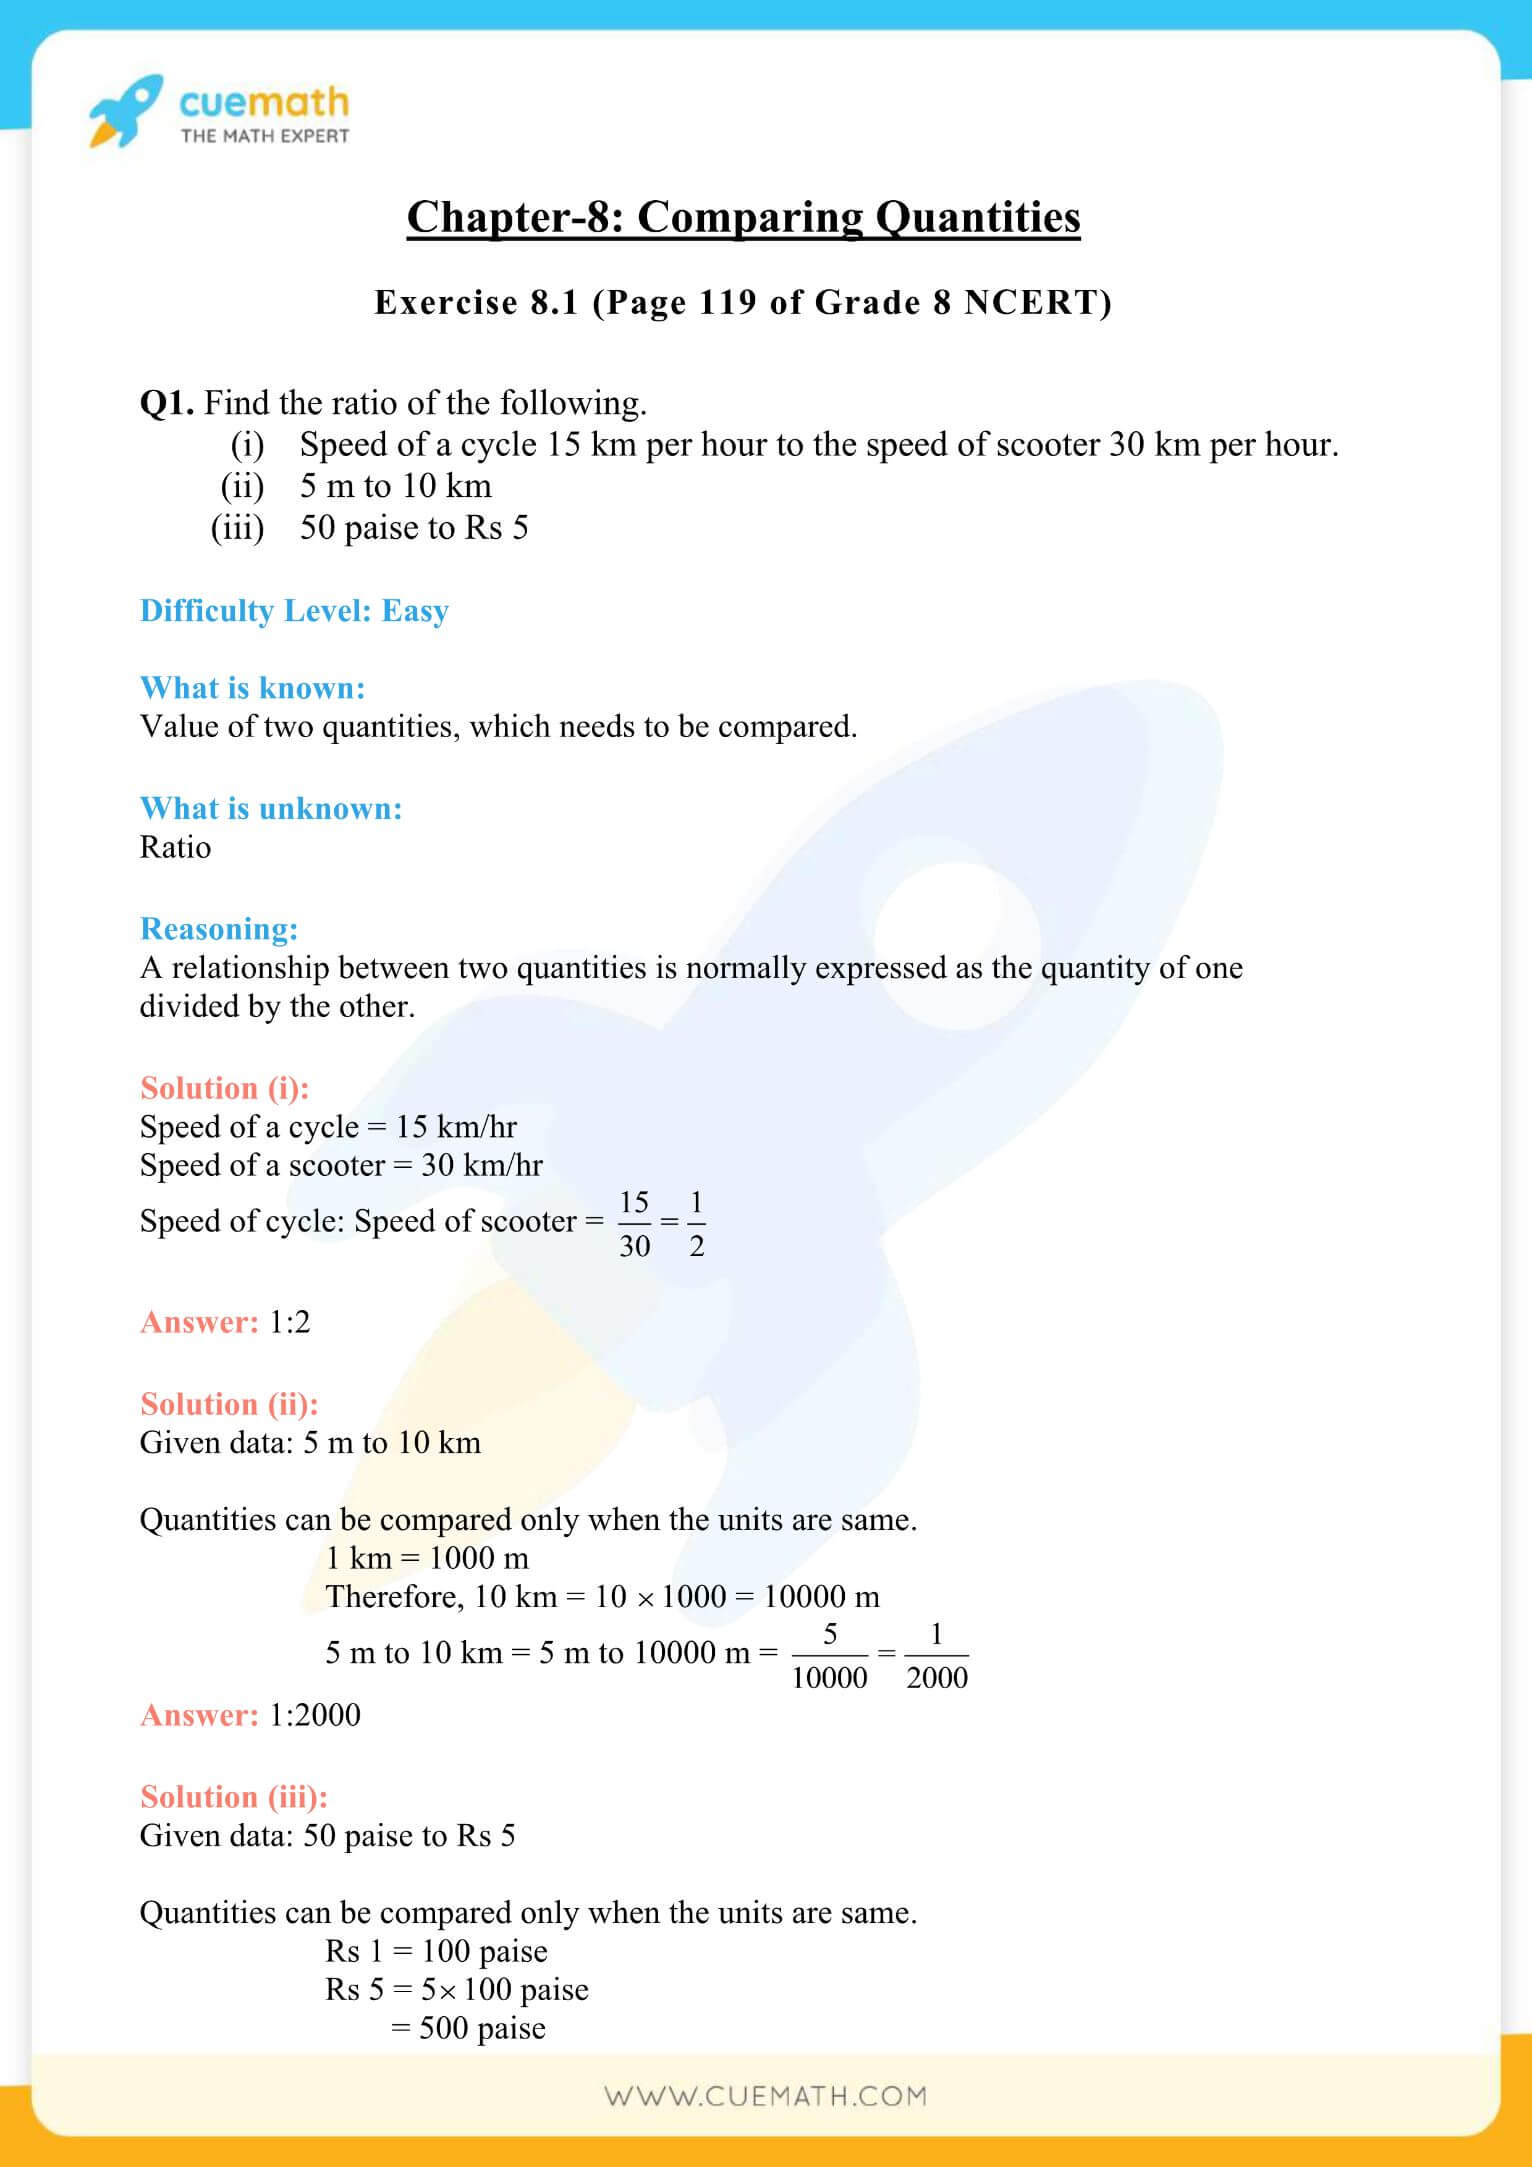 NCERT Solutions Class 8 Math Chapter 8 Comparing Quantities 1